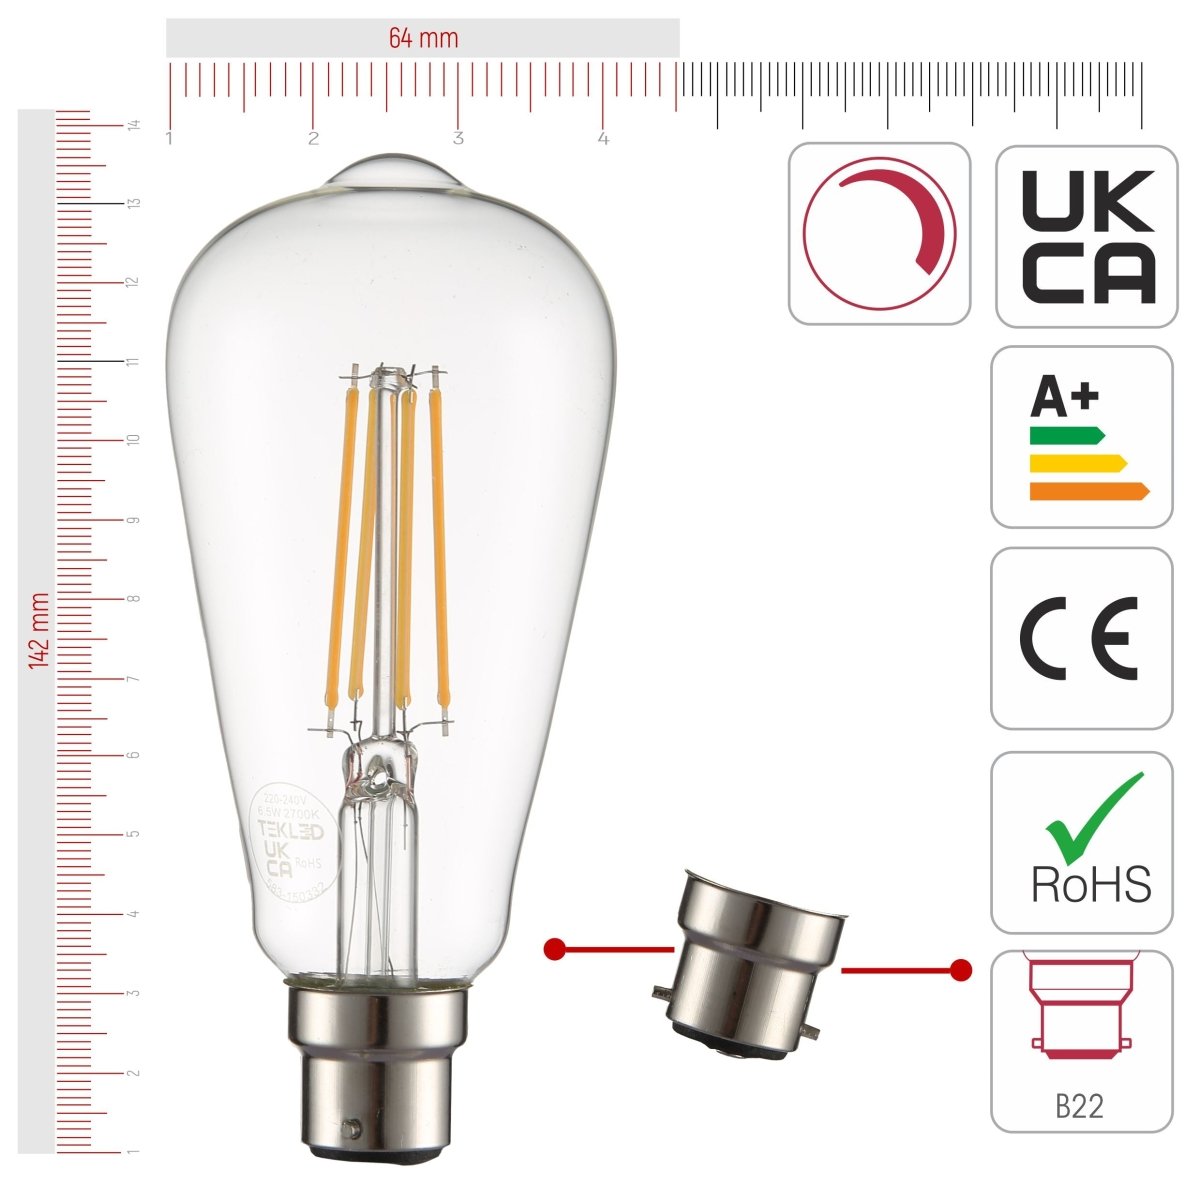 Size and certifications of LED Dimmable Filament Bulb ST64 Edison B22 Bayonet Cap 6.5W 806lm Warm White 2700K Clear Pack of 2 | TEKLED 583-150332